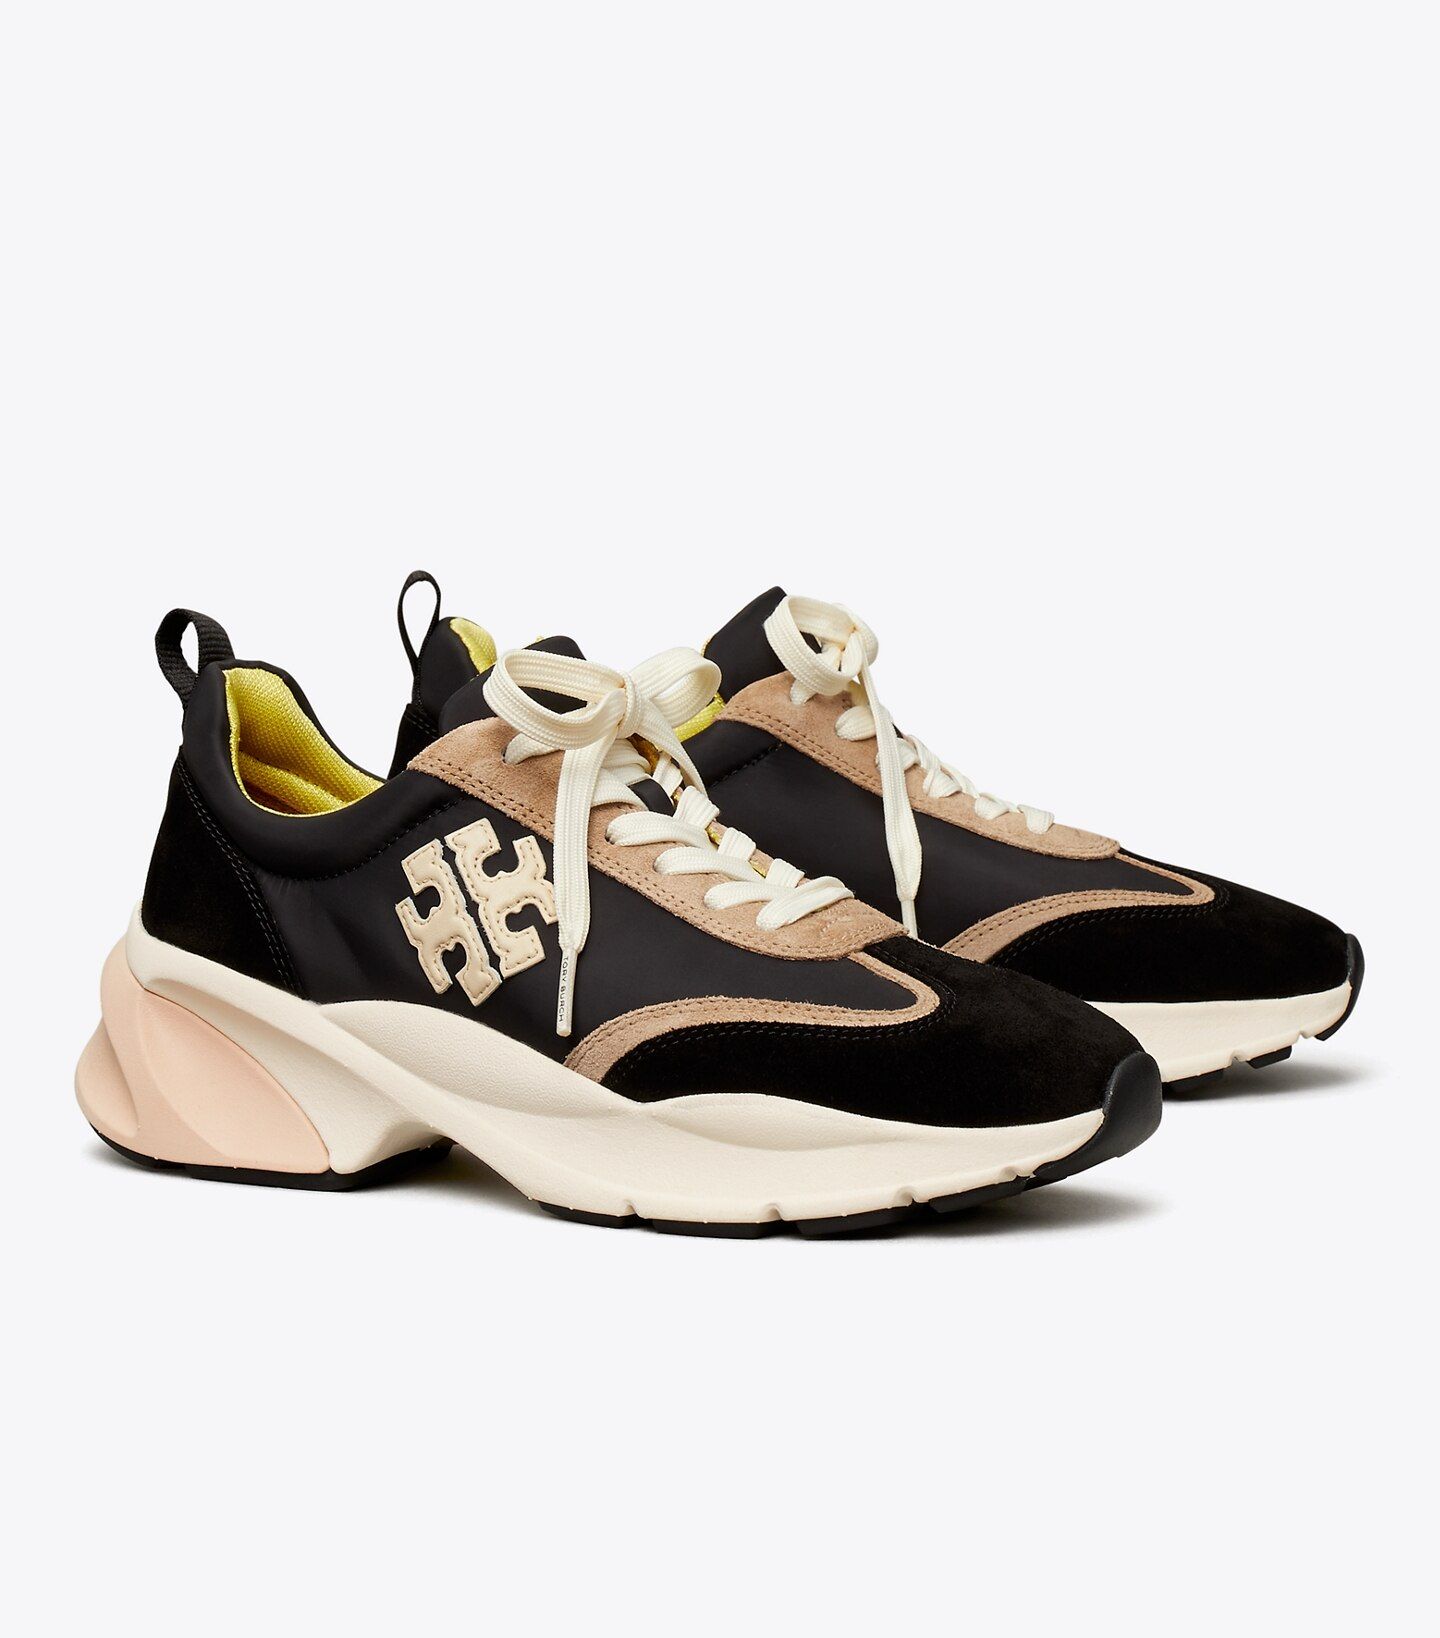 GOOD LUCK TRAINER | Tory Burch (US)